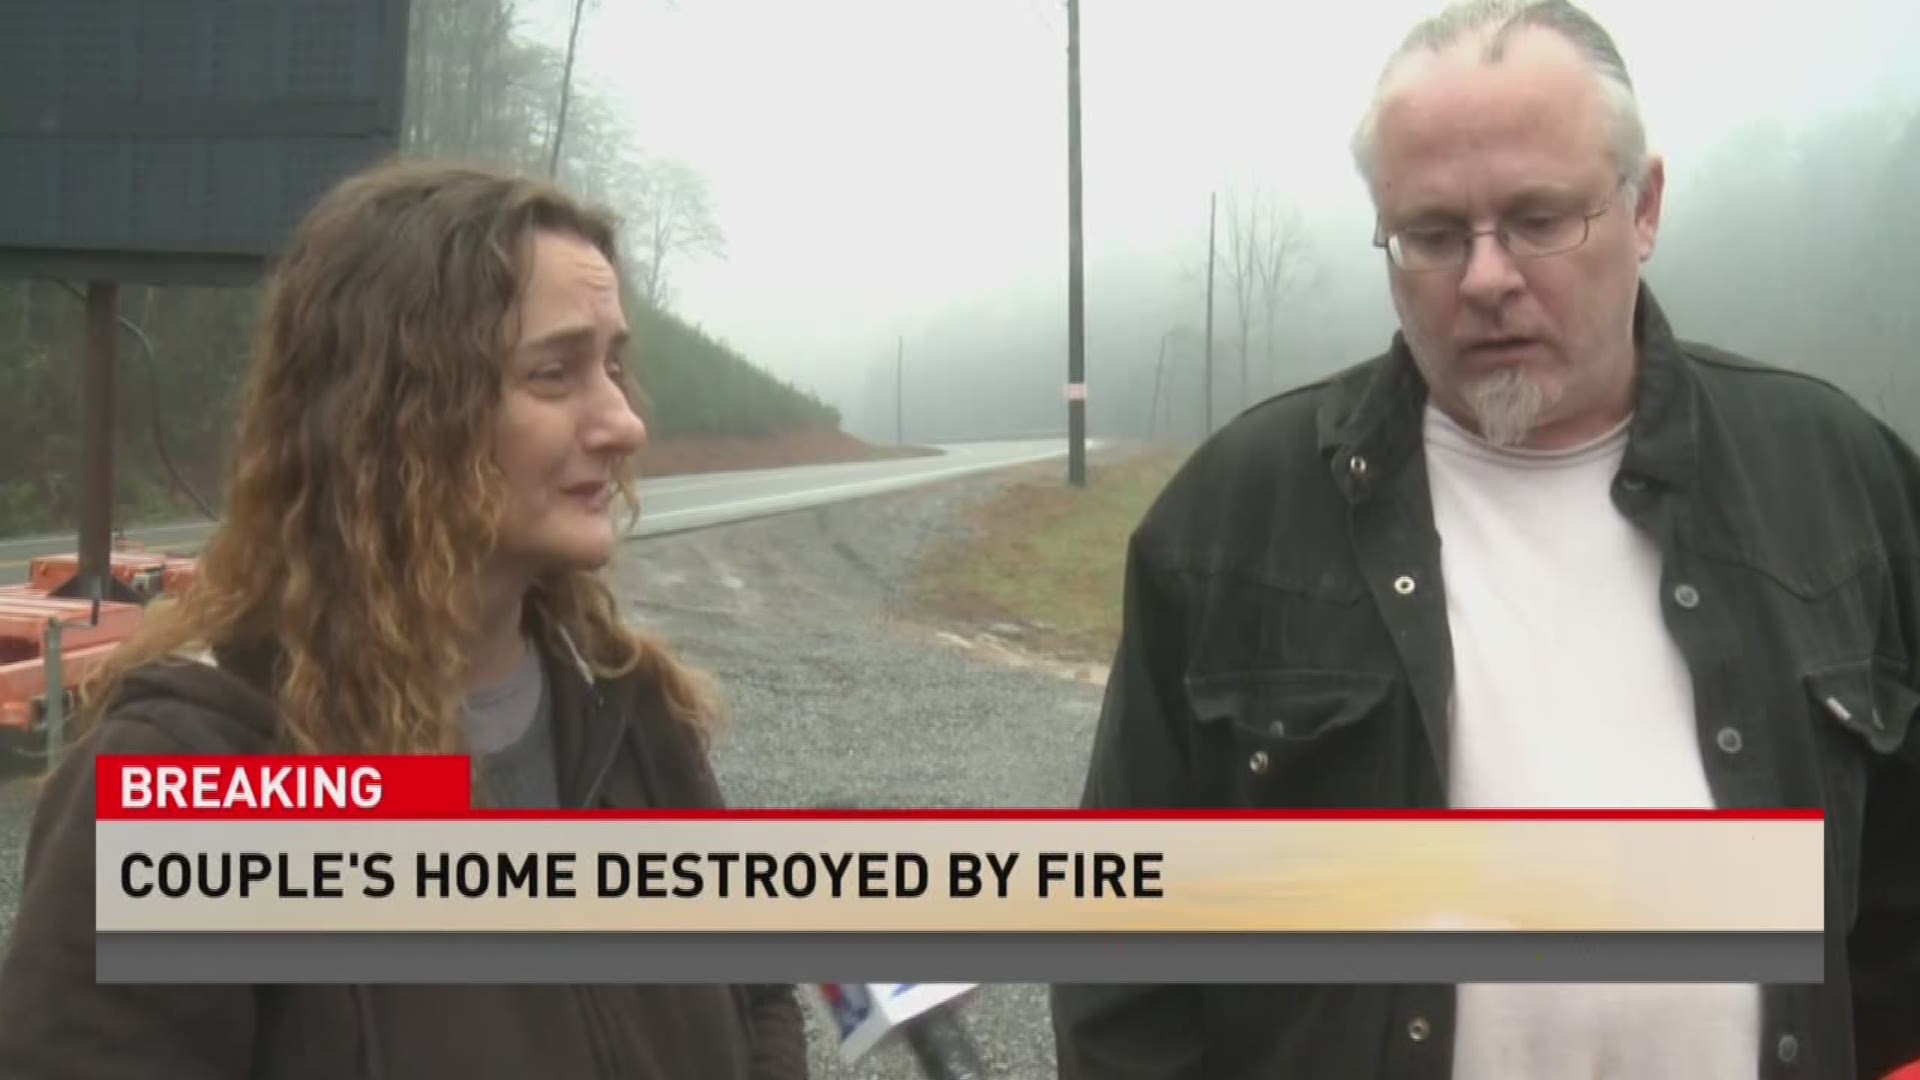 A local couple talks about finding their home destroyed by wildfire. Video from Nov. 29, 2016.